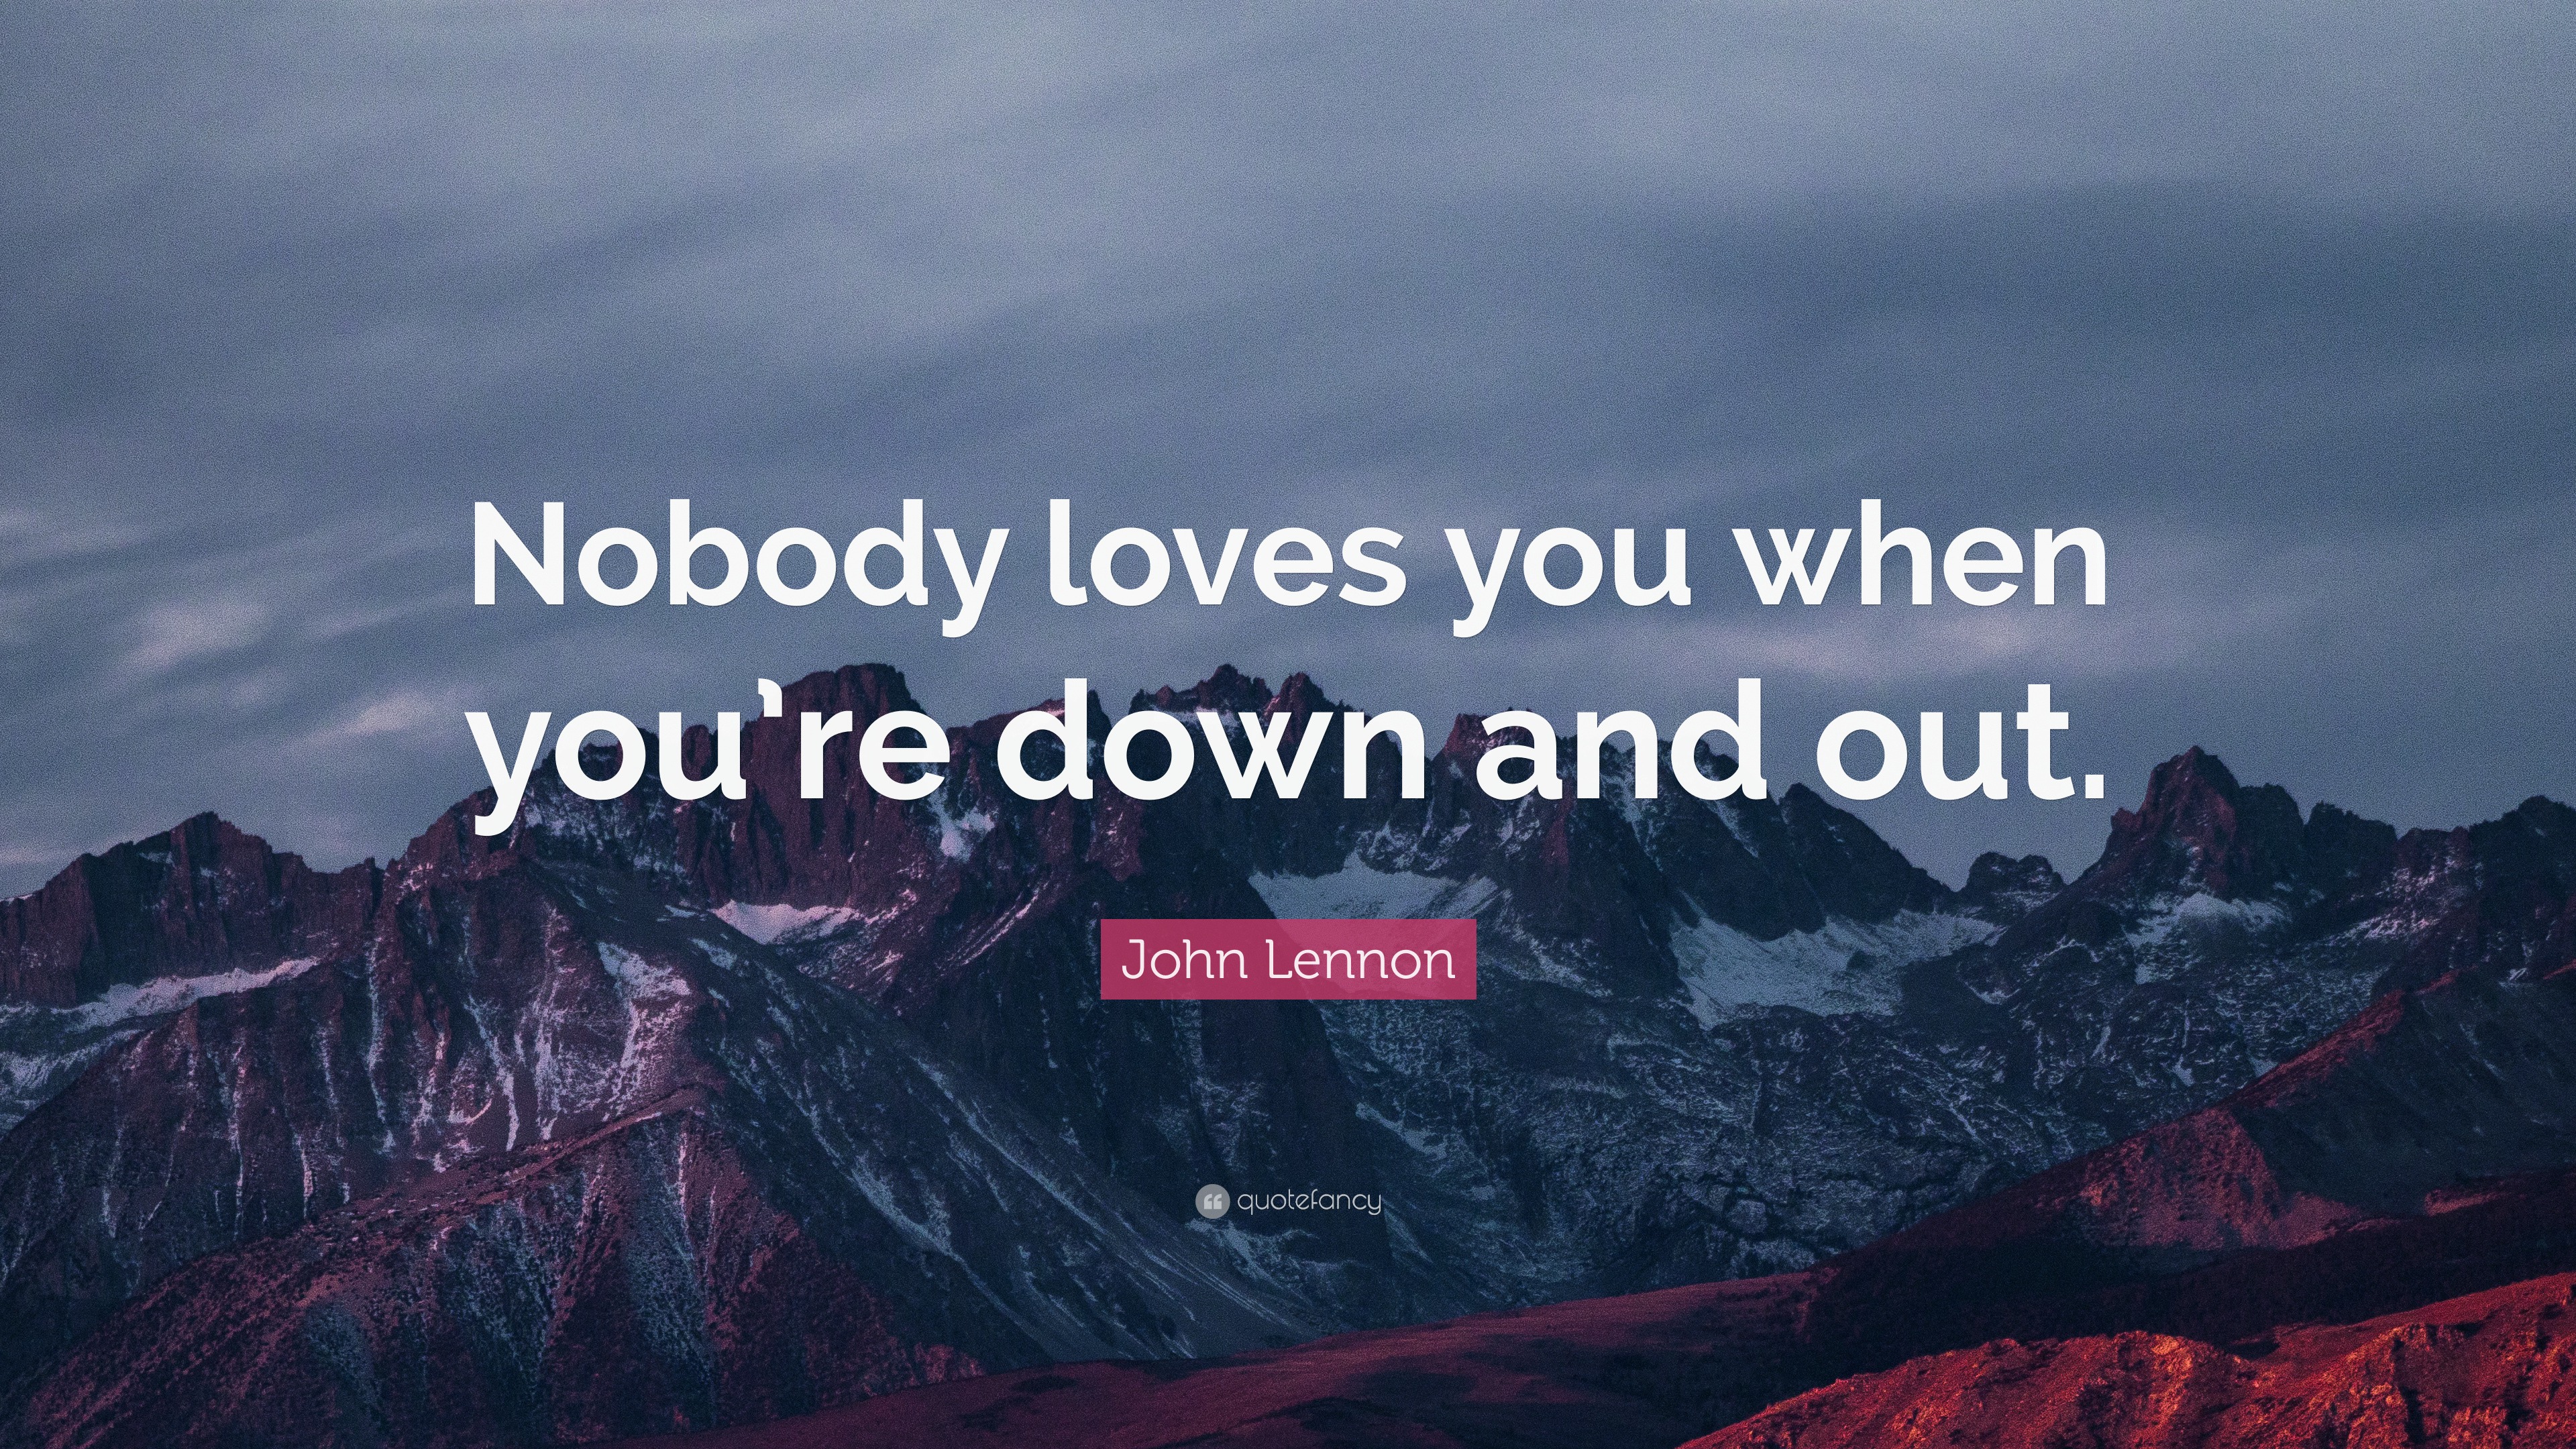 John Lennon Quote: “Nobody loves you when you’re down and out.”